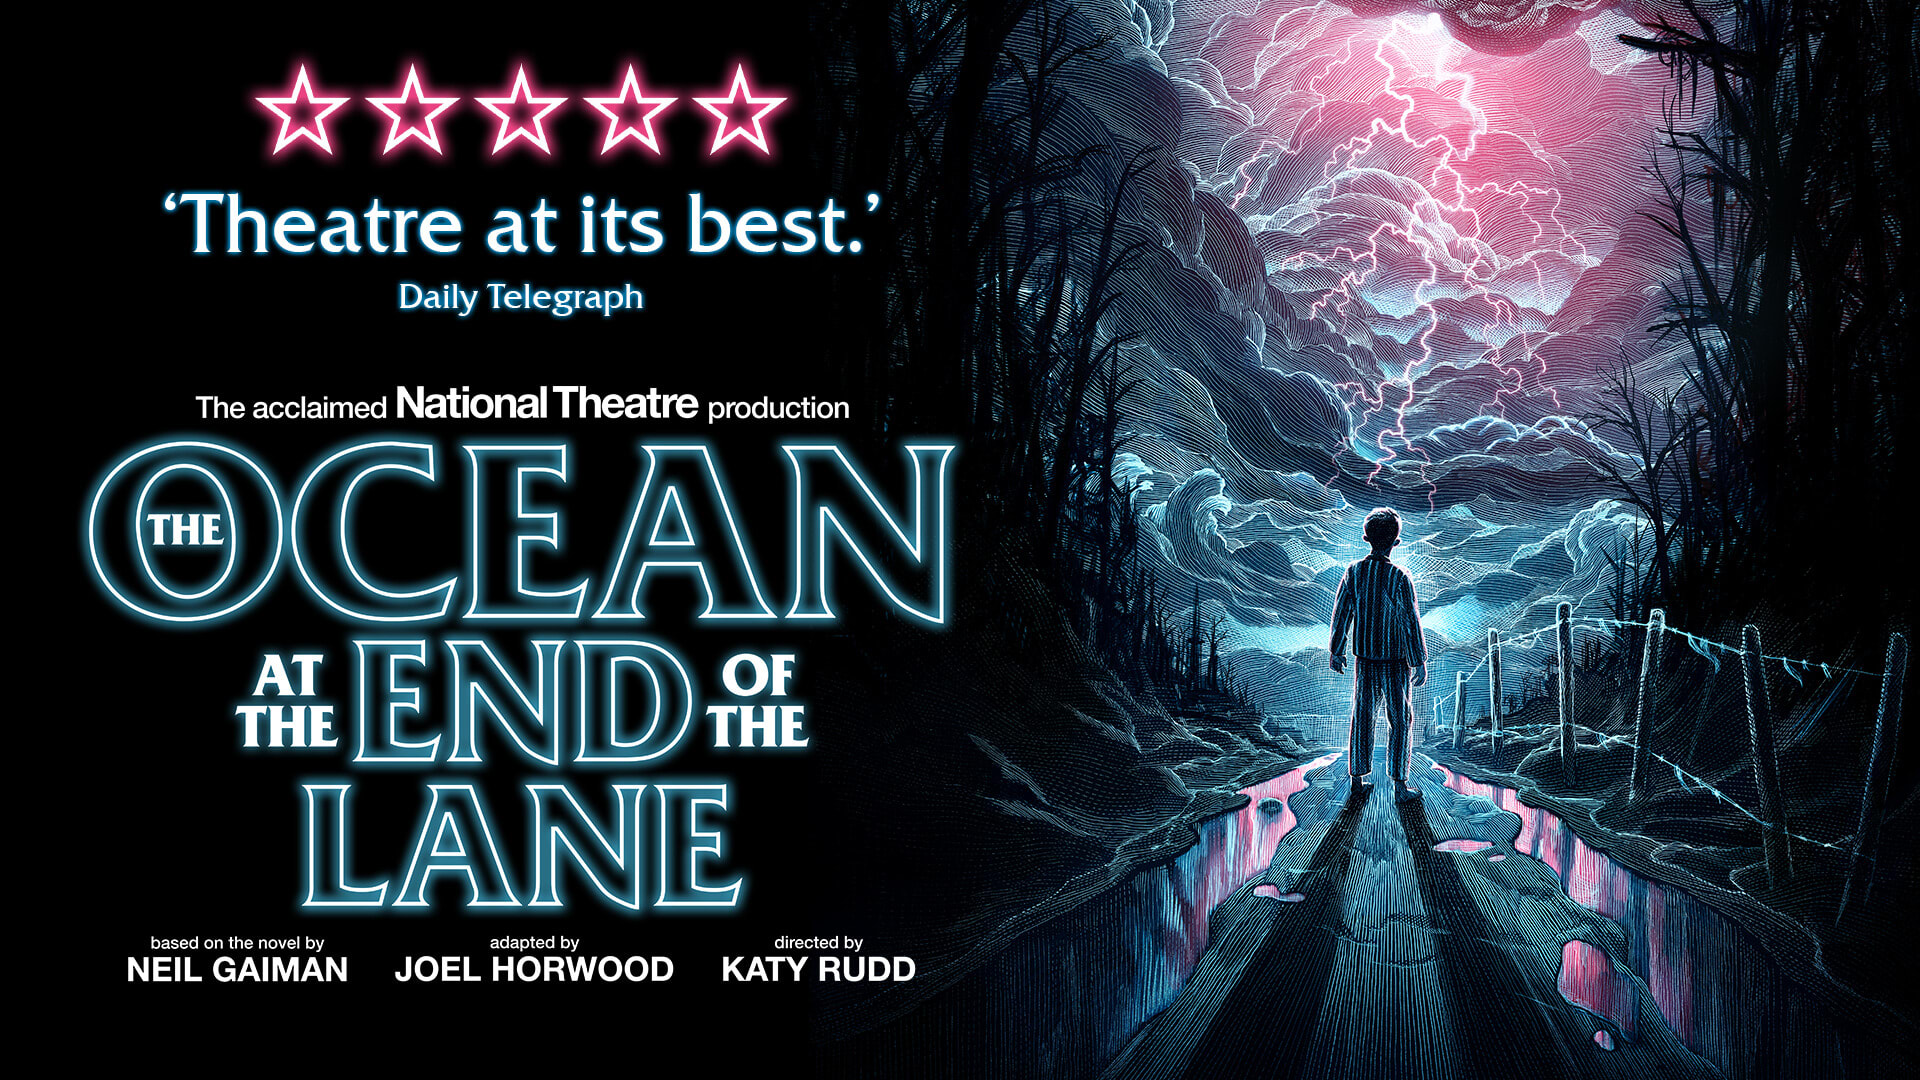 The Ocean at the End of the Lane OU Theatre Group Bookers Club Open